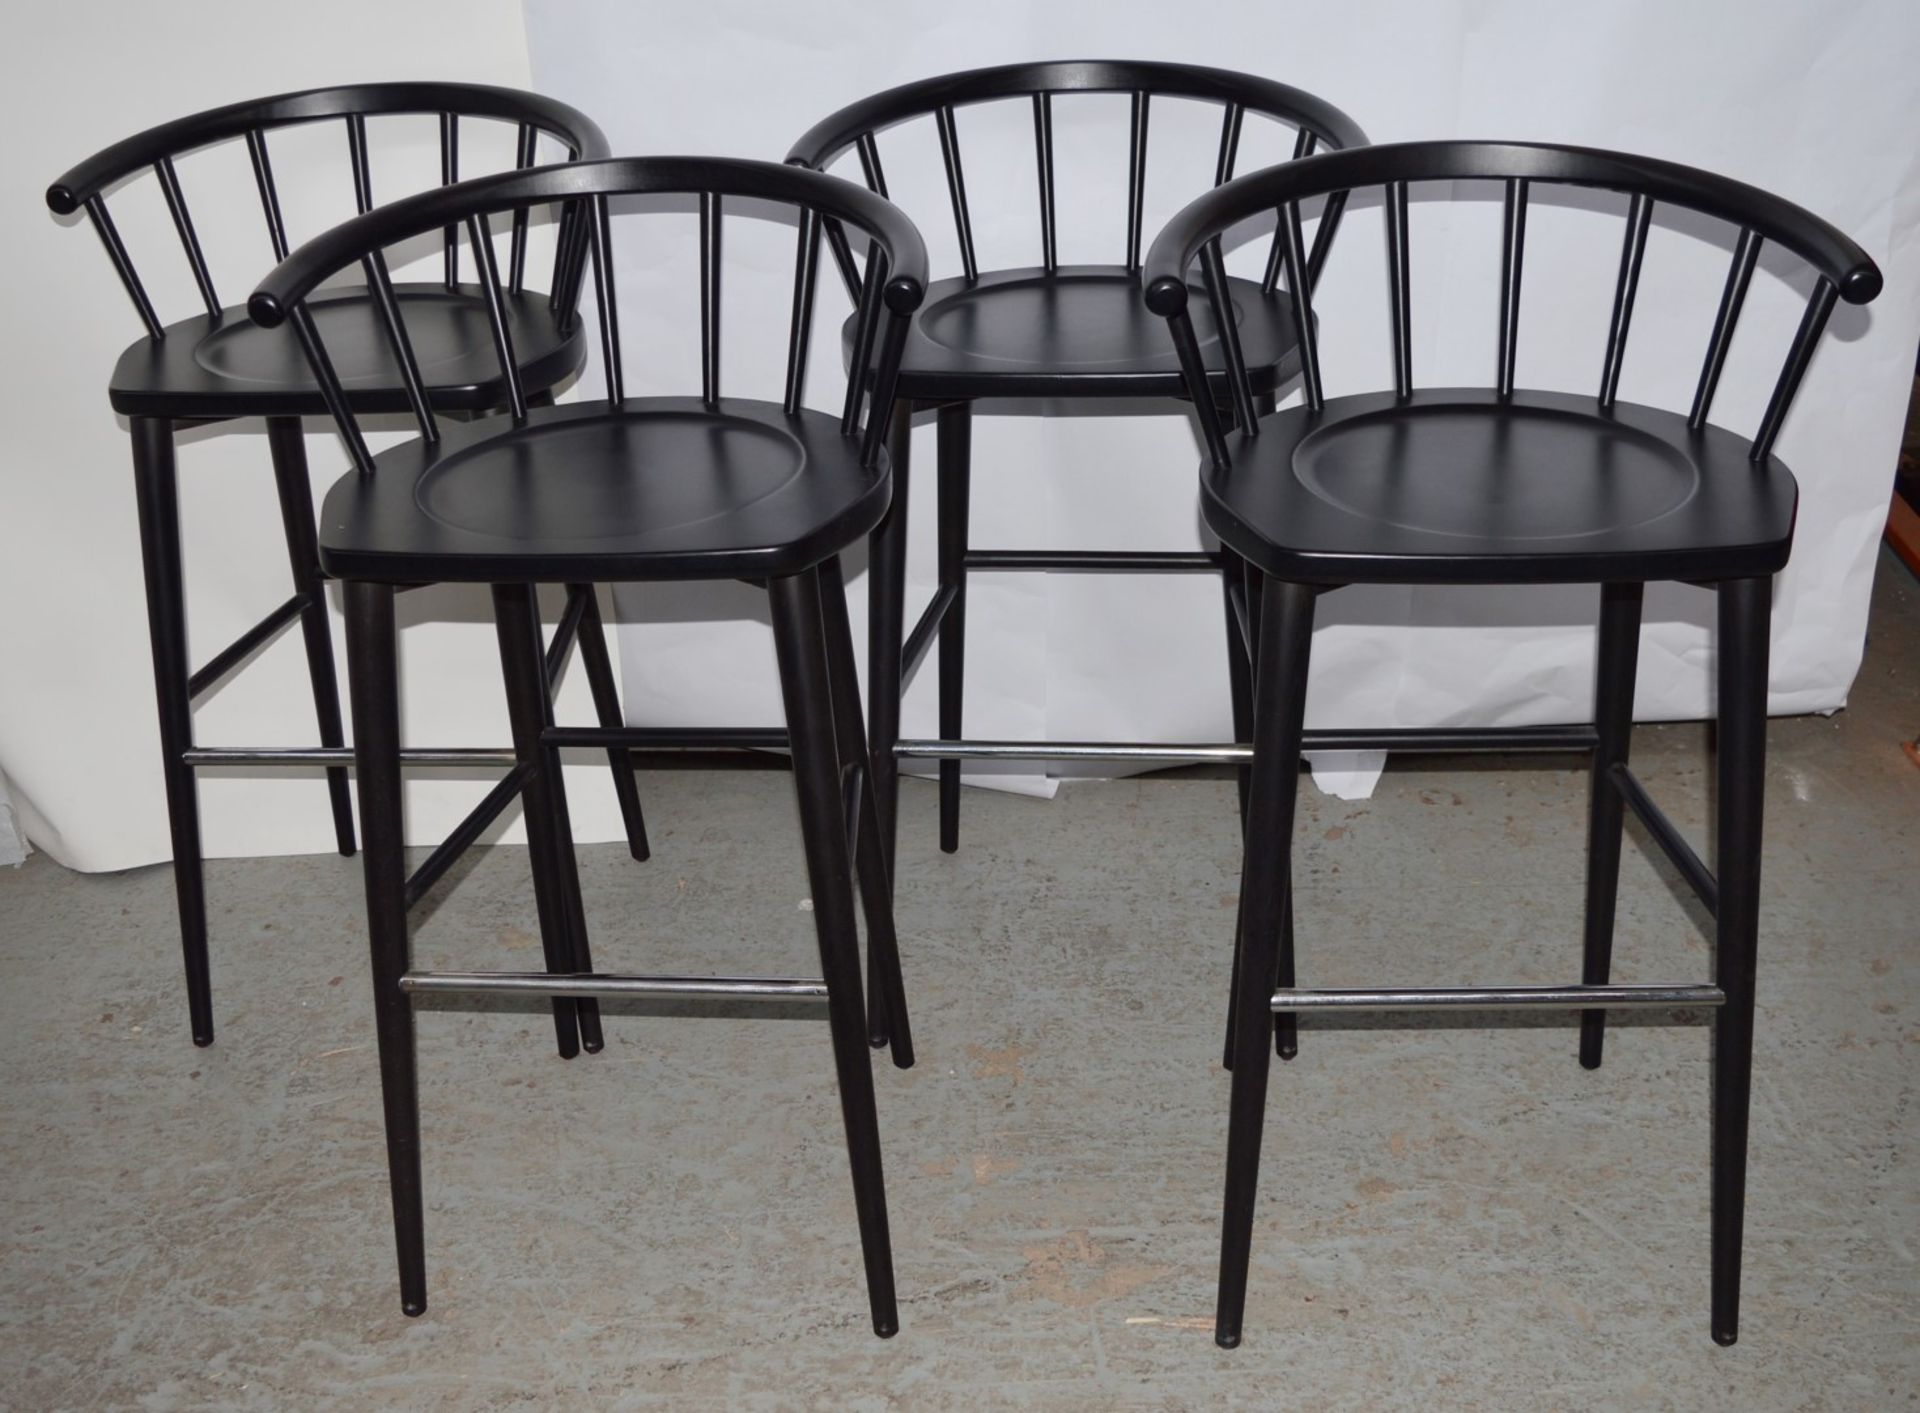 4 x Curved Spindleback Wooden Bar Stools With Shaped Seats and Dark Finish - Dimensions: H73 x W59 x - Image 2 of 10